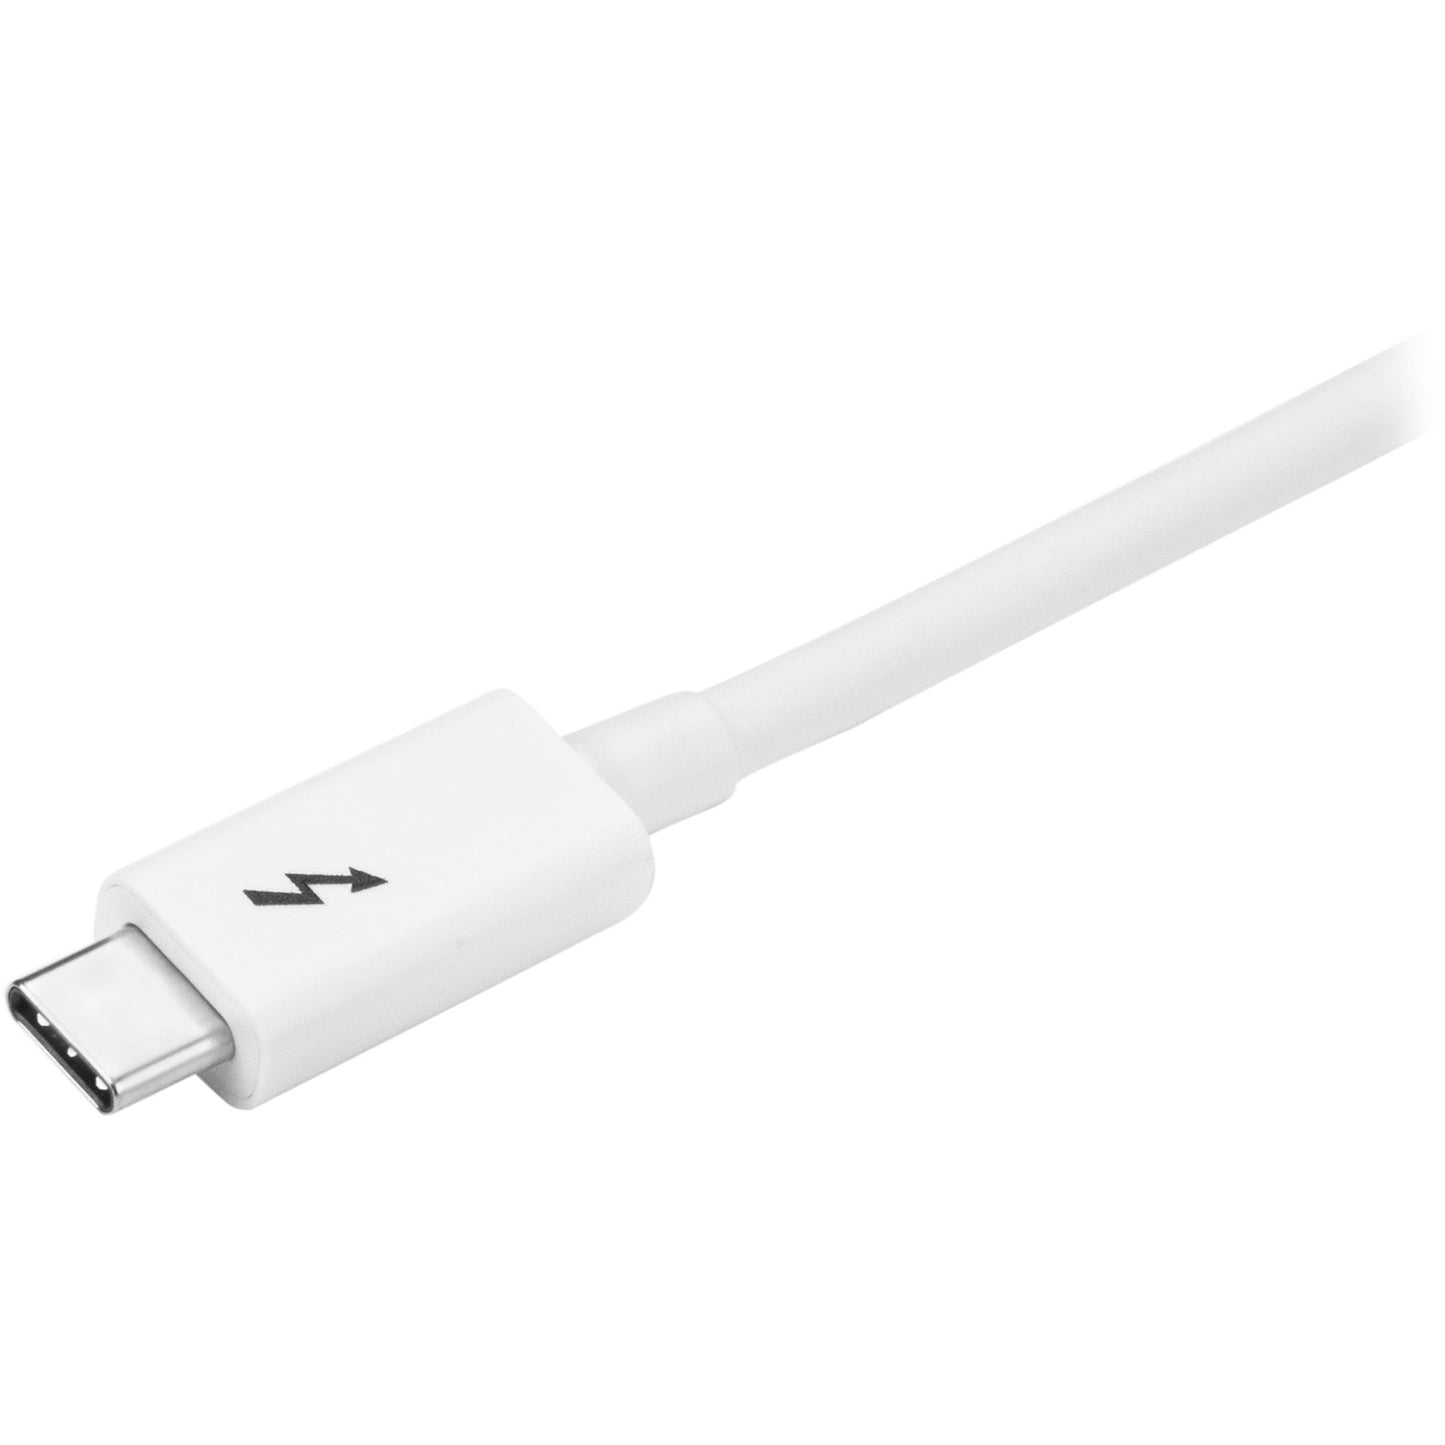 StarTech.com 1m Thunderbolt 3 Cable - 20Gbps - White - Thunderbolt / USB-C / DisplayPort Compatible - Thunderbolt 3 USB-C Cable